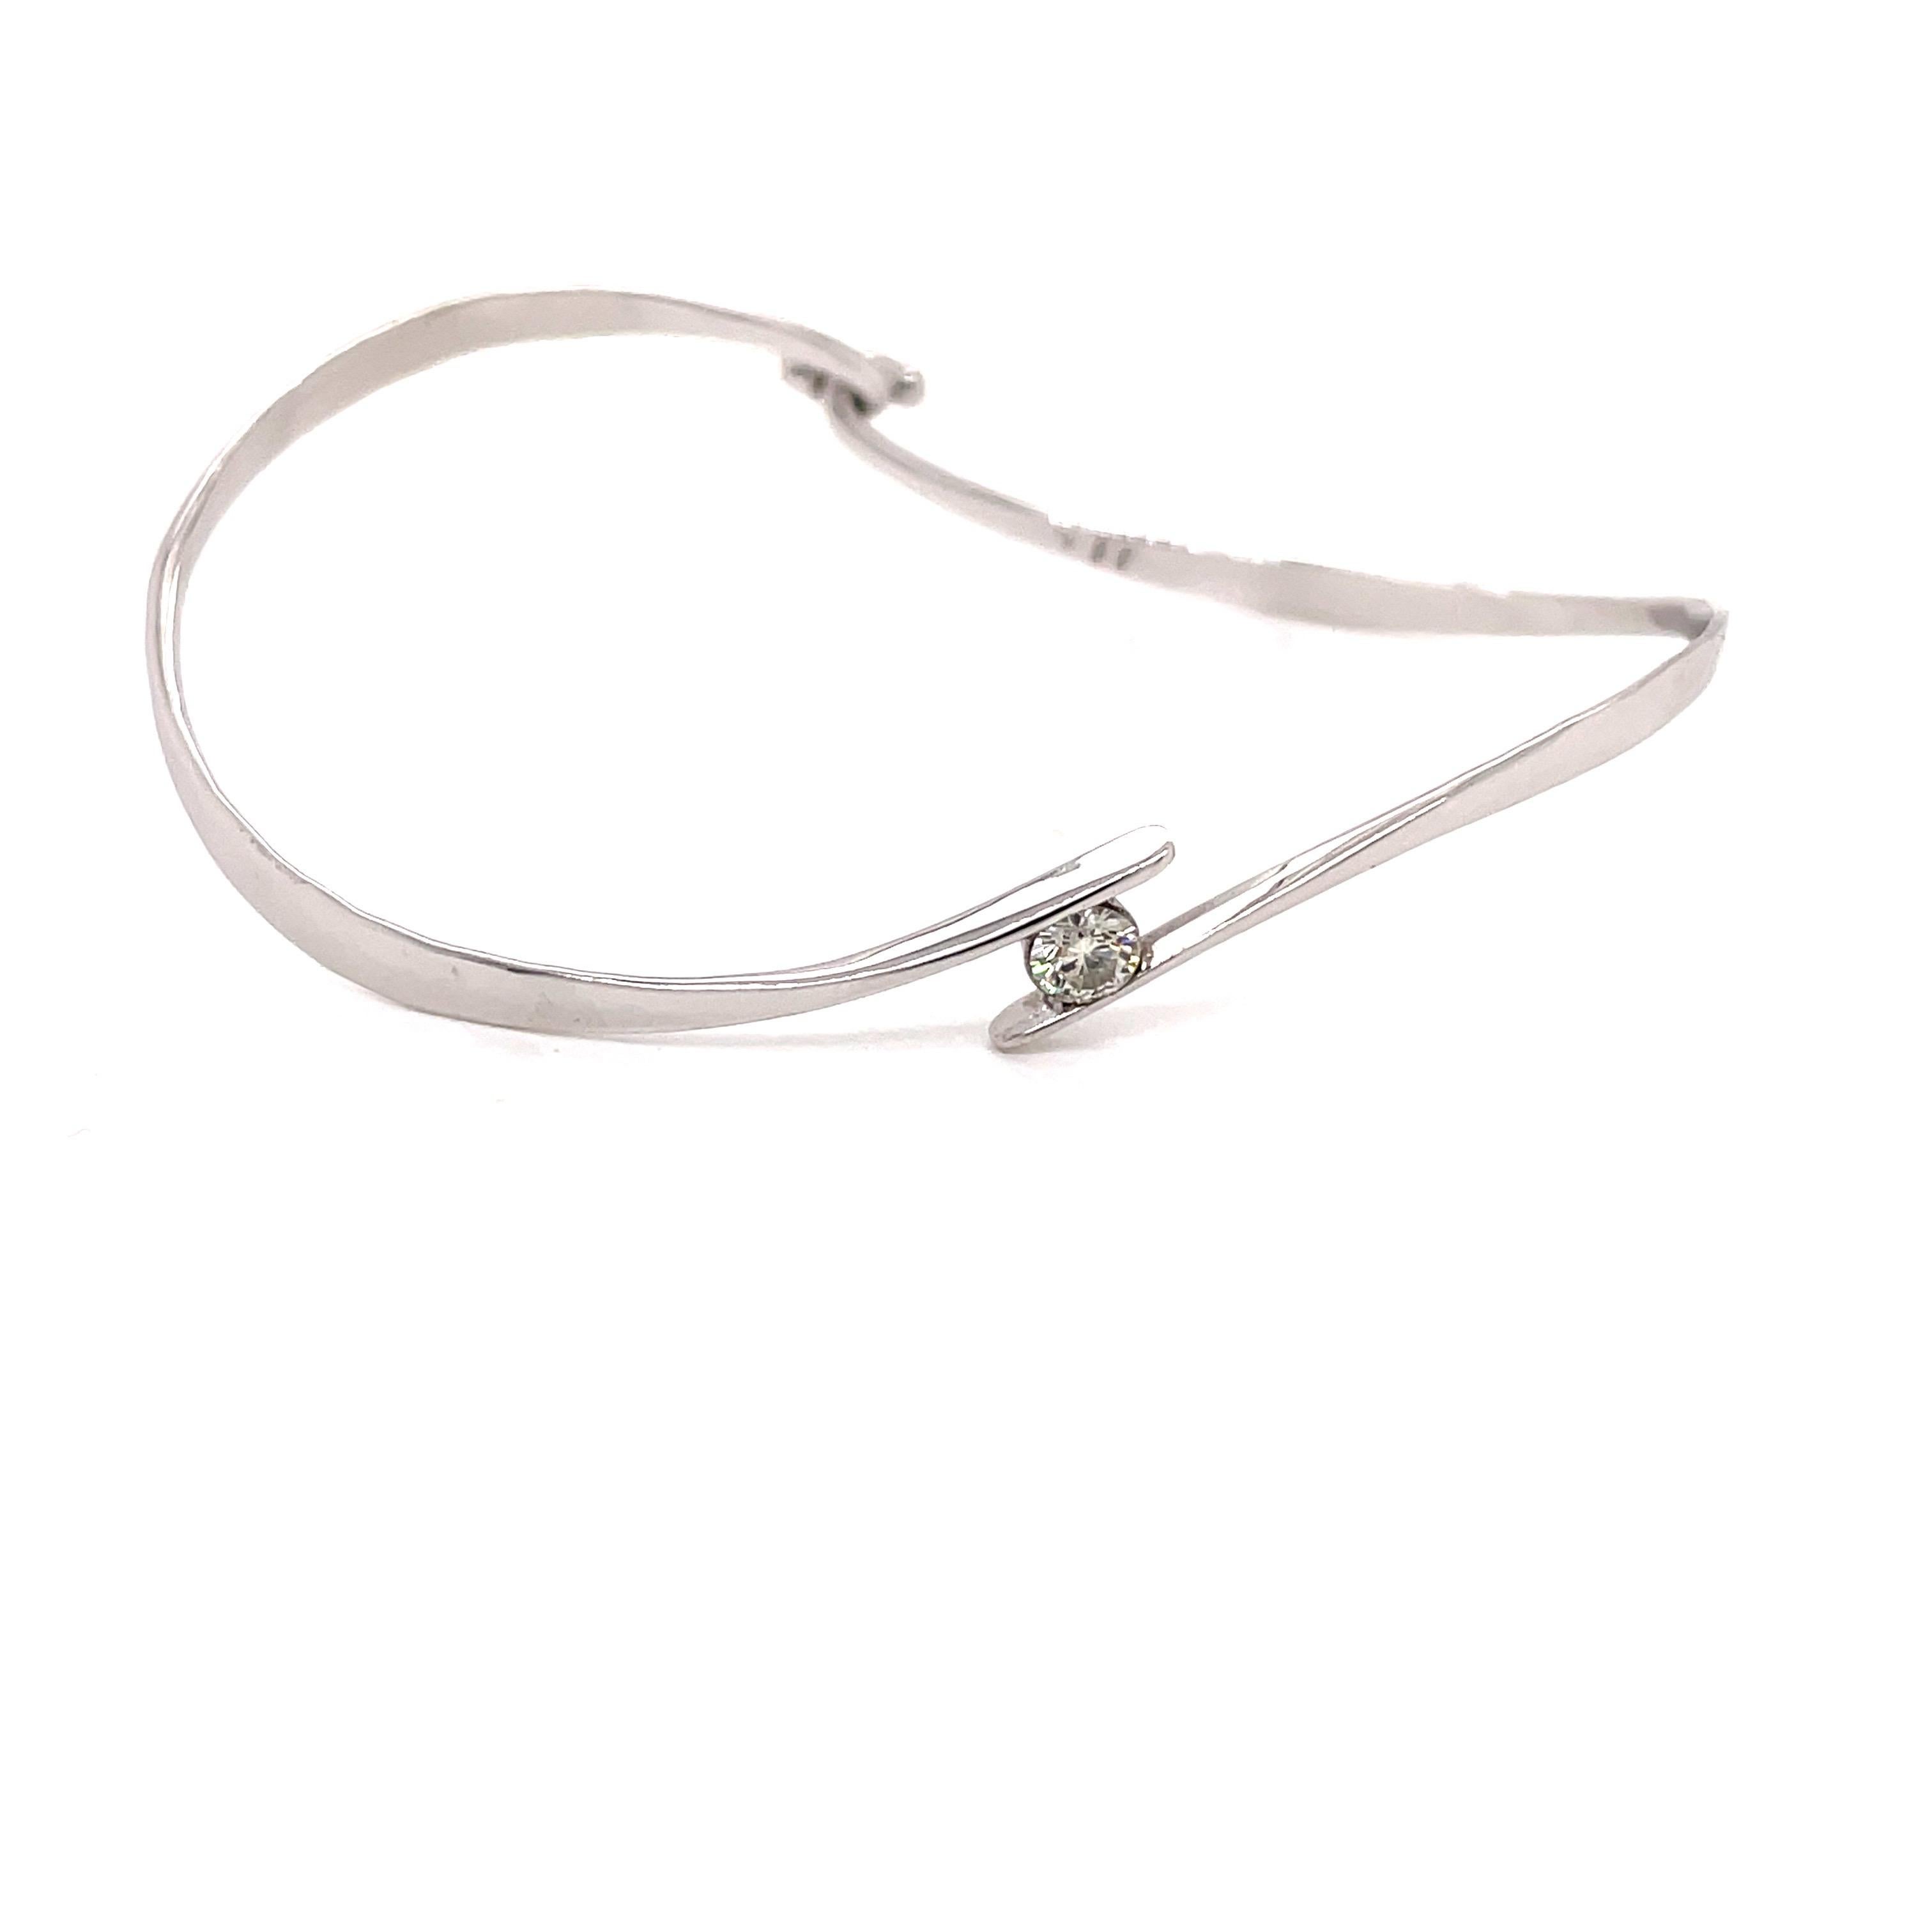 Platinum Swirl Bangle Bracelet with .27ct Diamond - The diamond is H color and VS2 clarity. The clasp is a hook on the bottom and the bangle is stamped PT 950. The inside diameter is 1.75 inches high and 2.5 inches wide. The bangle weighs 8.34 grams.